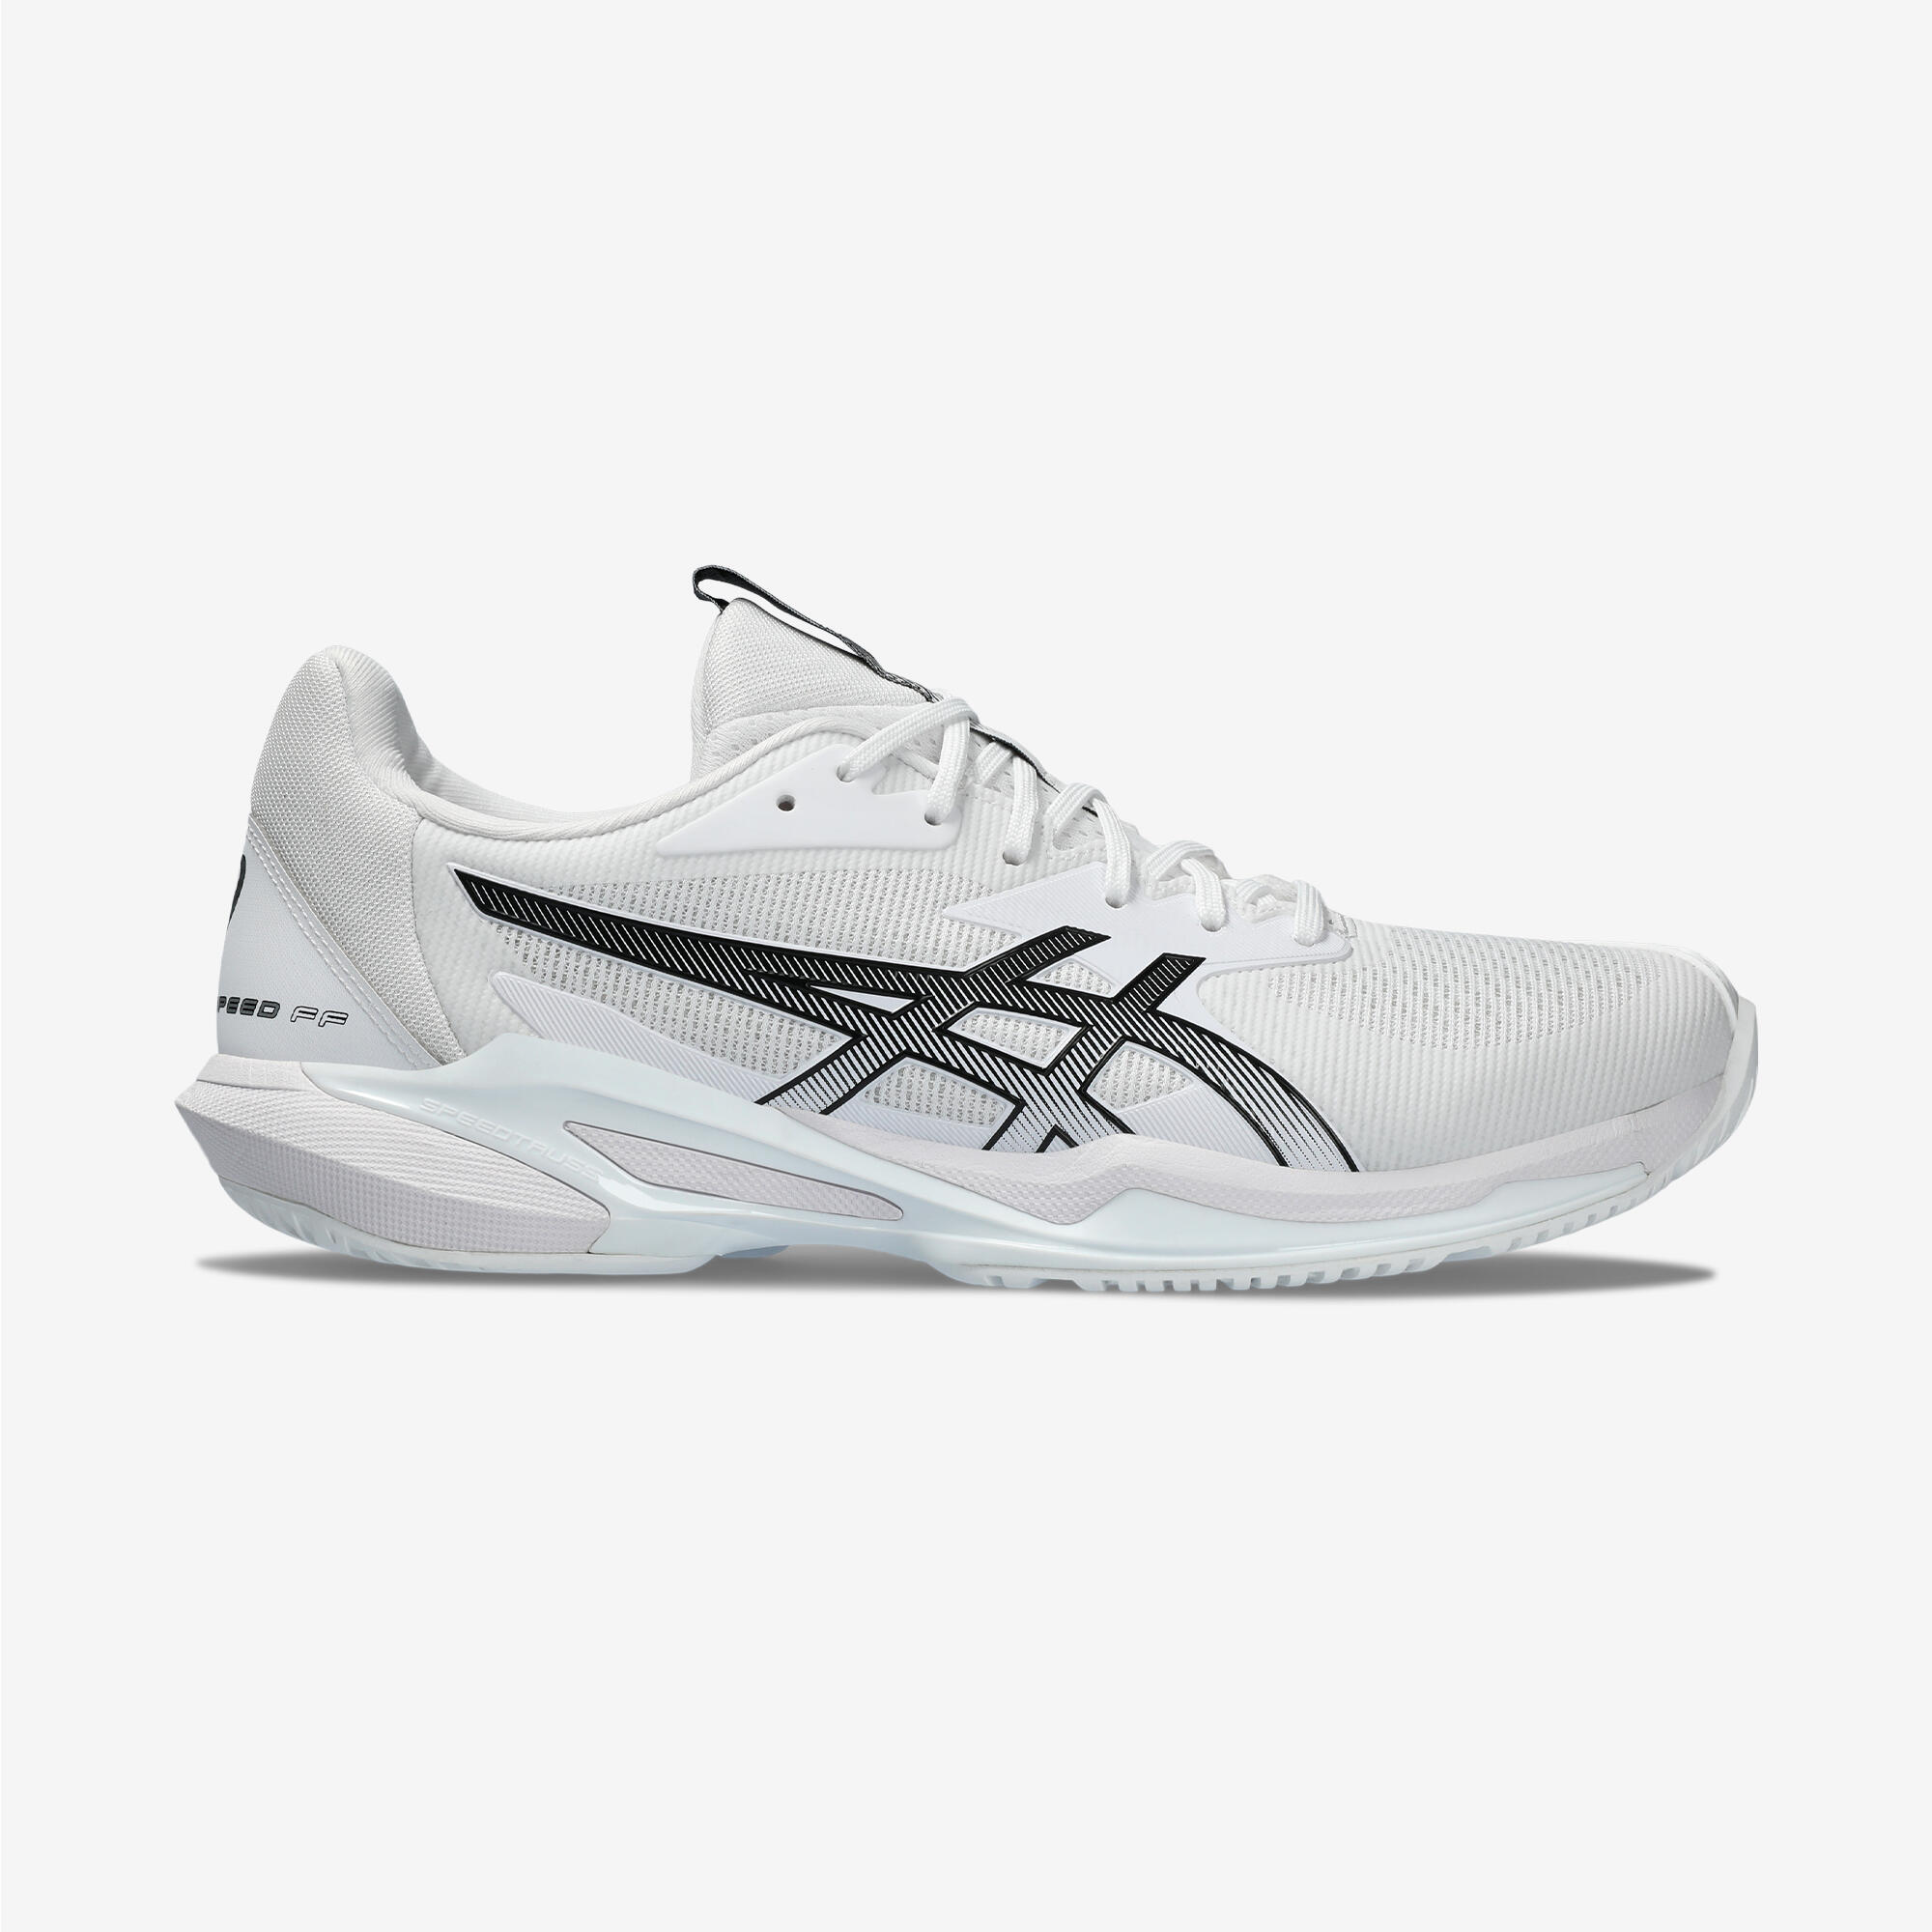 ASICS Men's Clay Court Tennis Shoes Gel-solution Speed Ff 3 - White